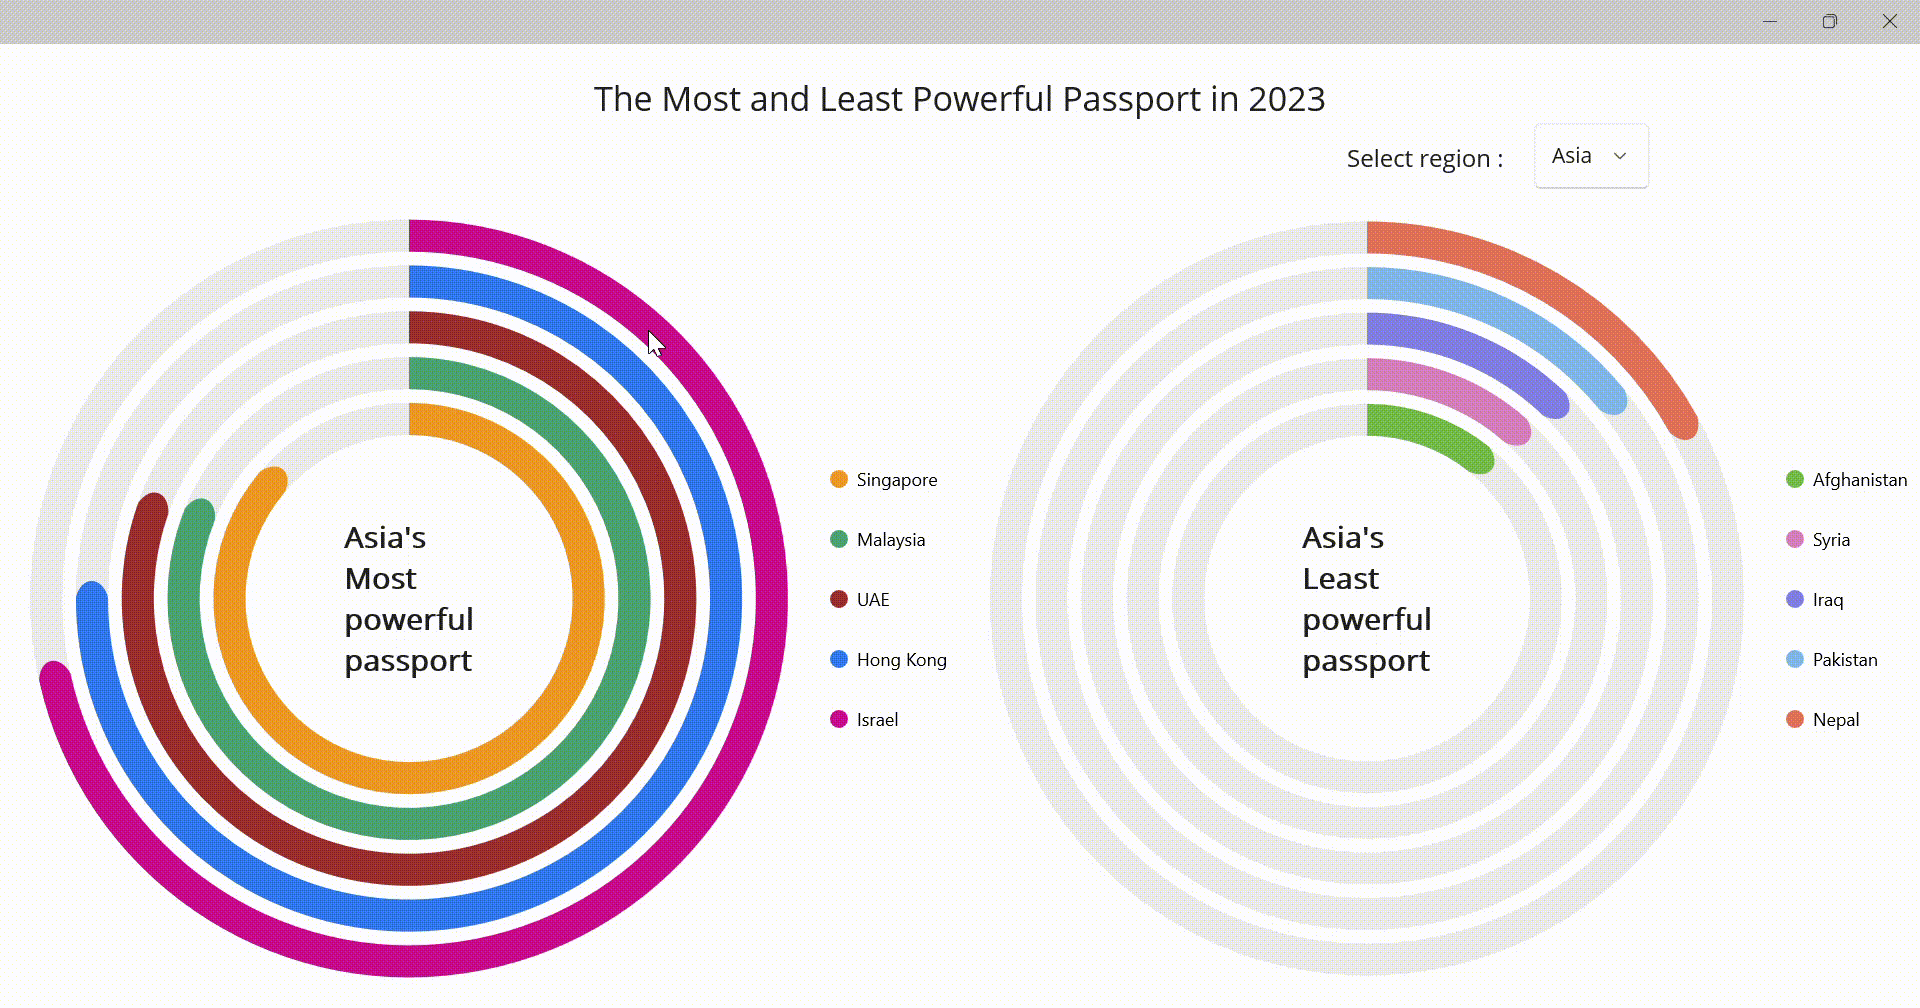 Visualizing the most and least powerful passports in 2023 using Syncfusion’s .NET MAUI radial bar chart